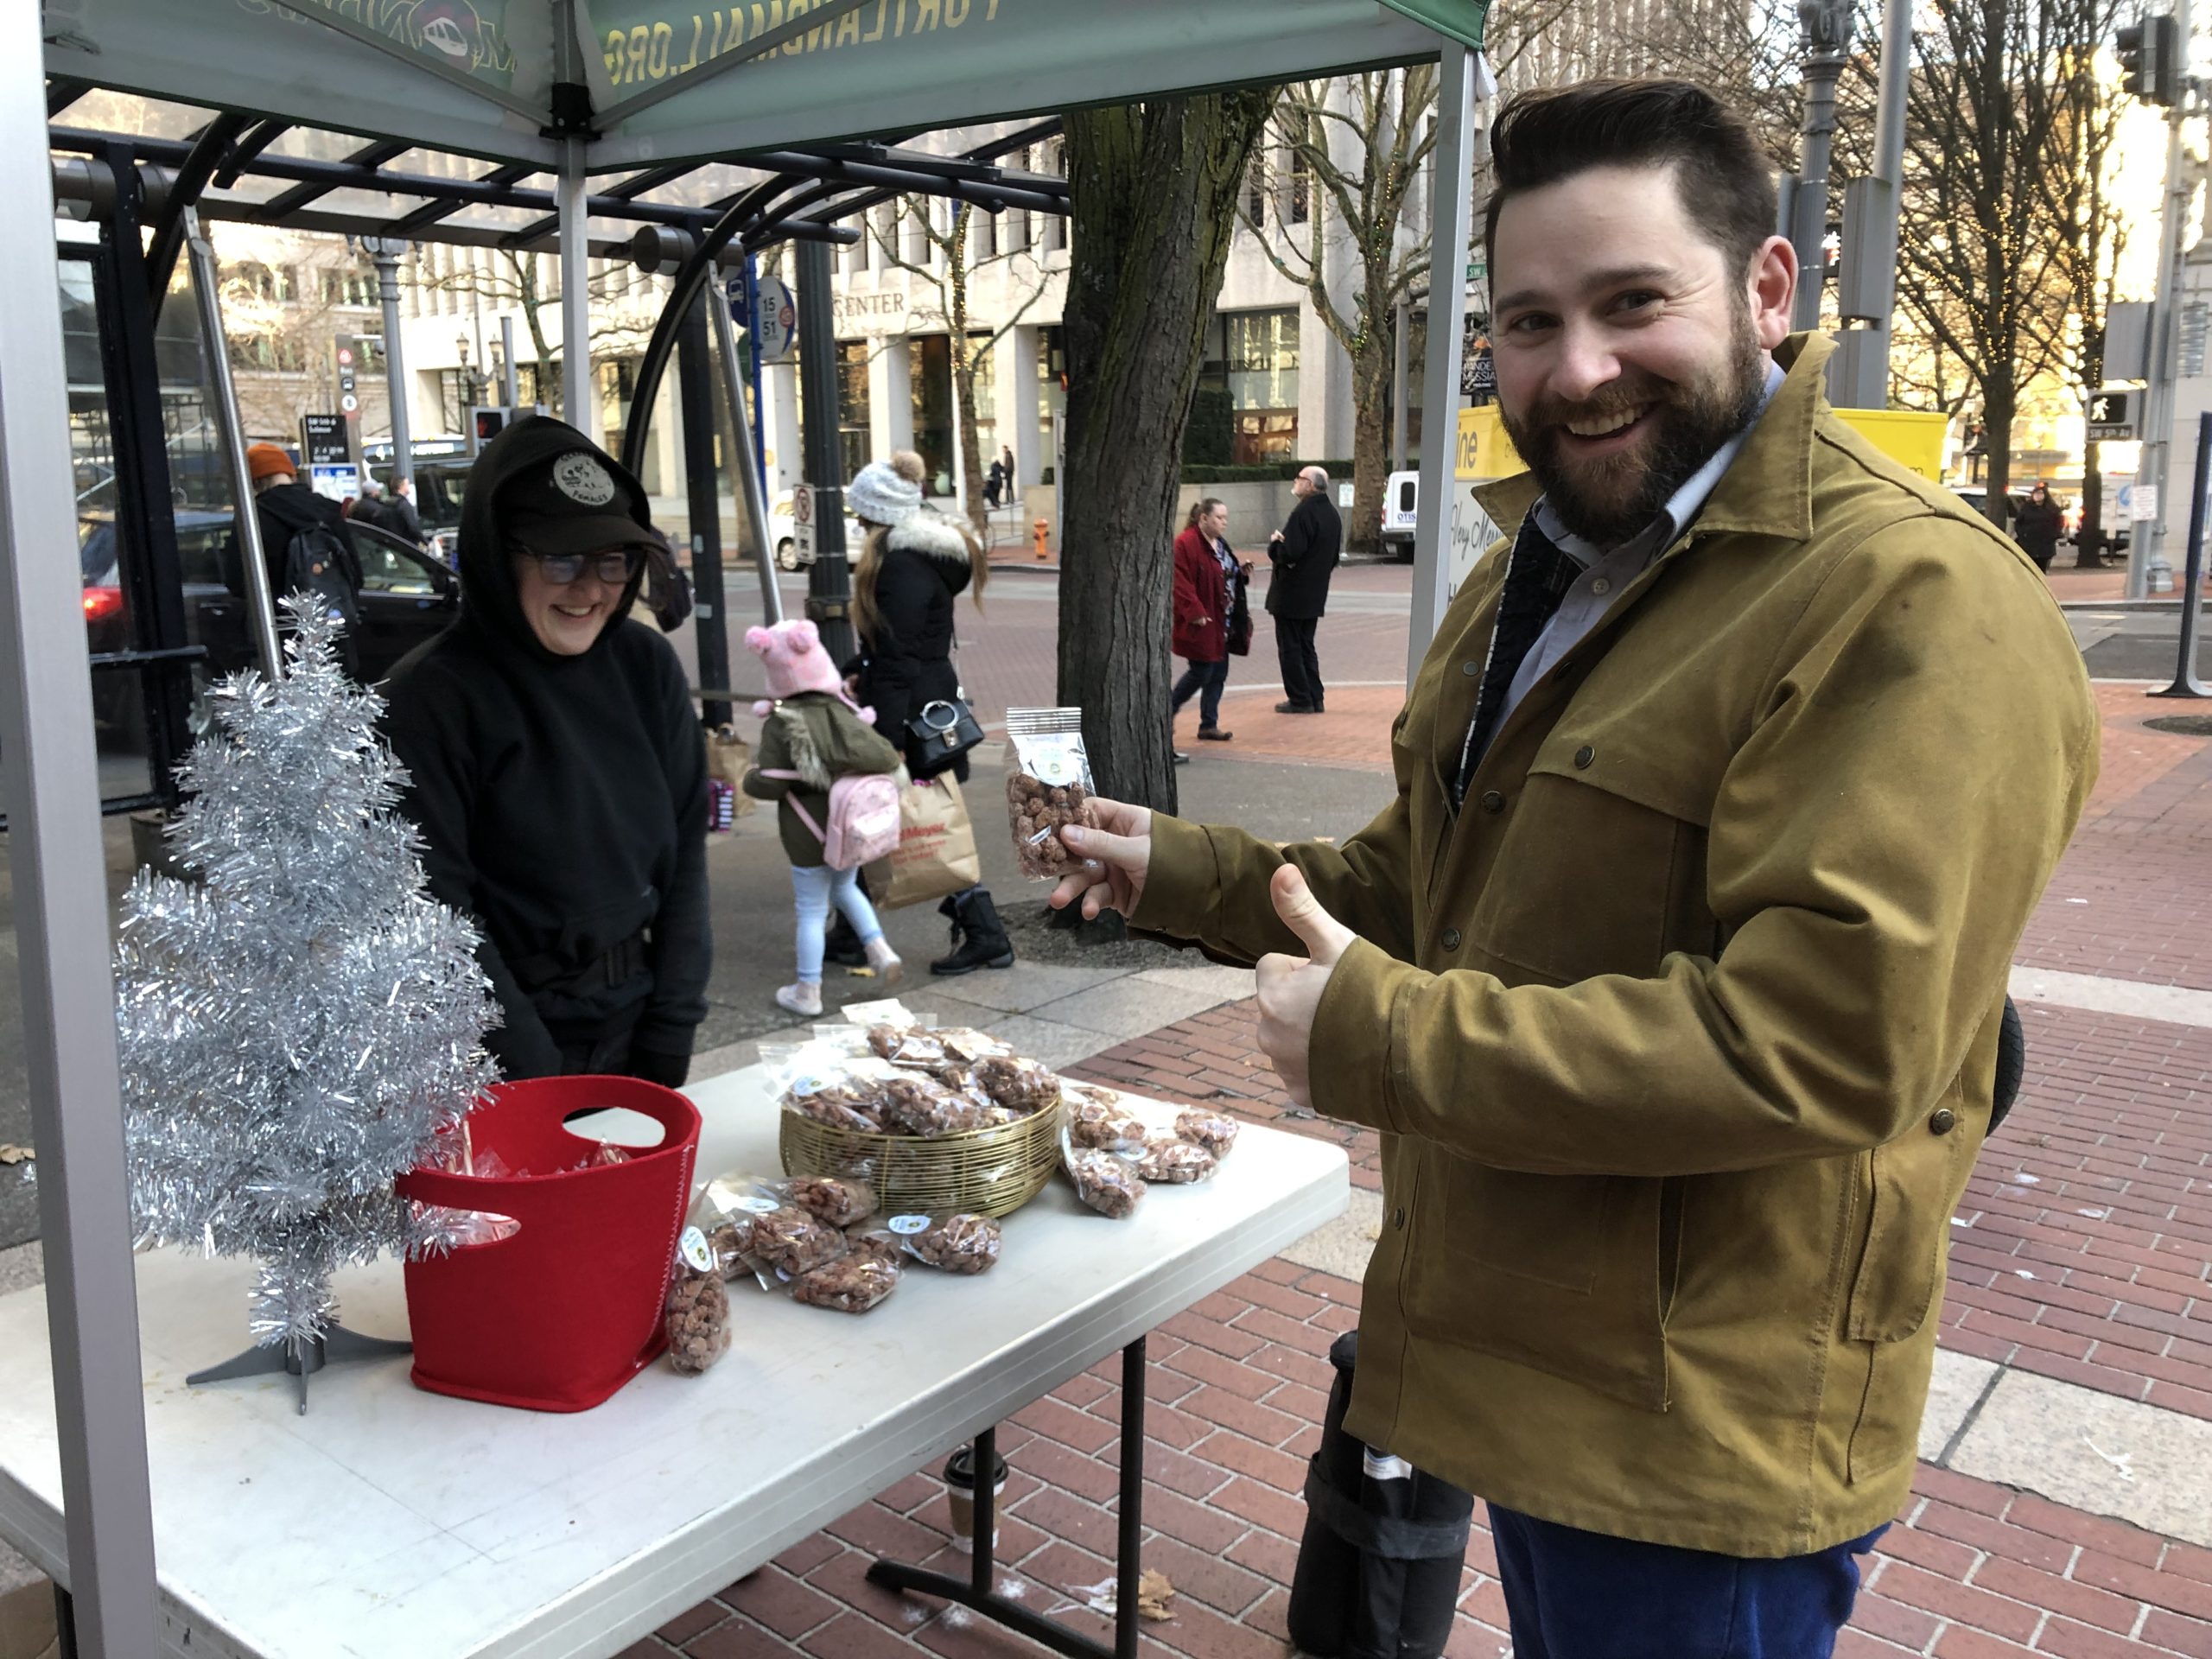 Celebrate the Holidays with Pop-Up events along Portland’s Transit Mall!